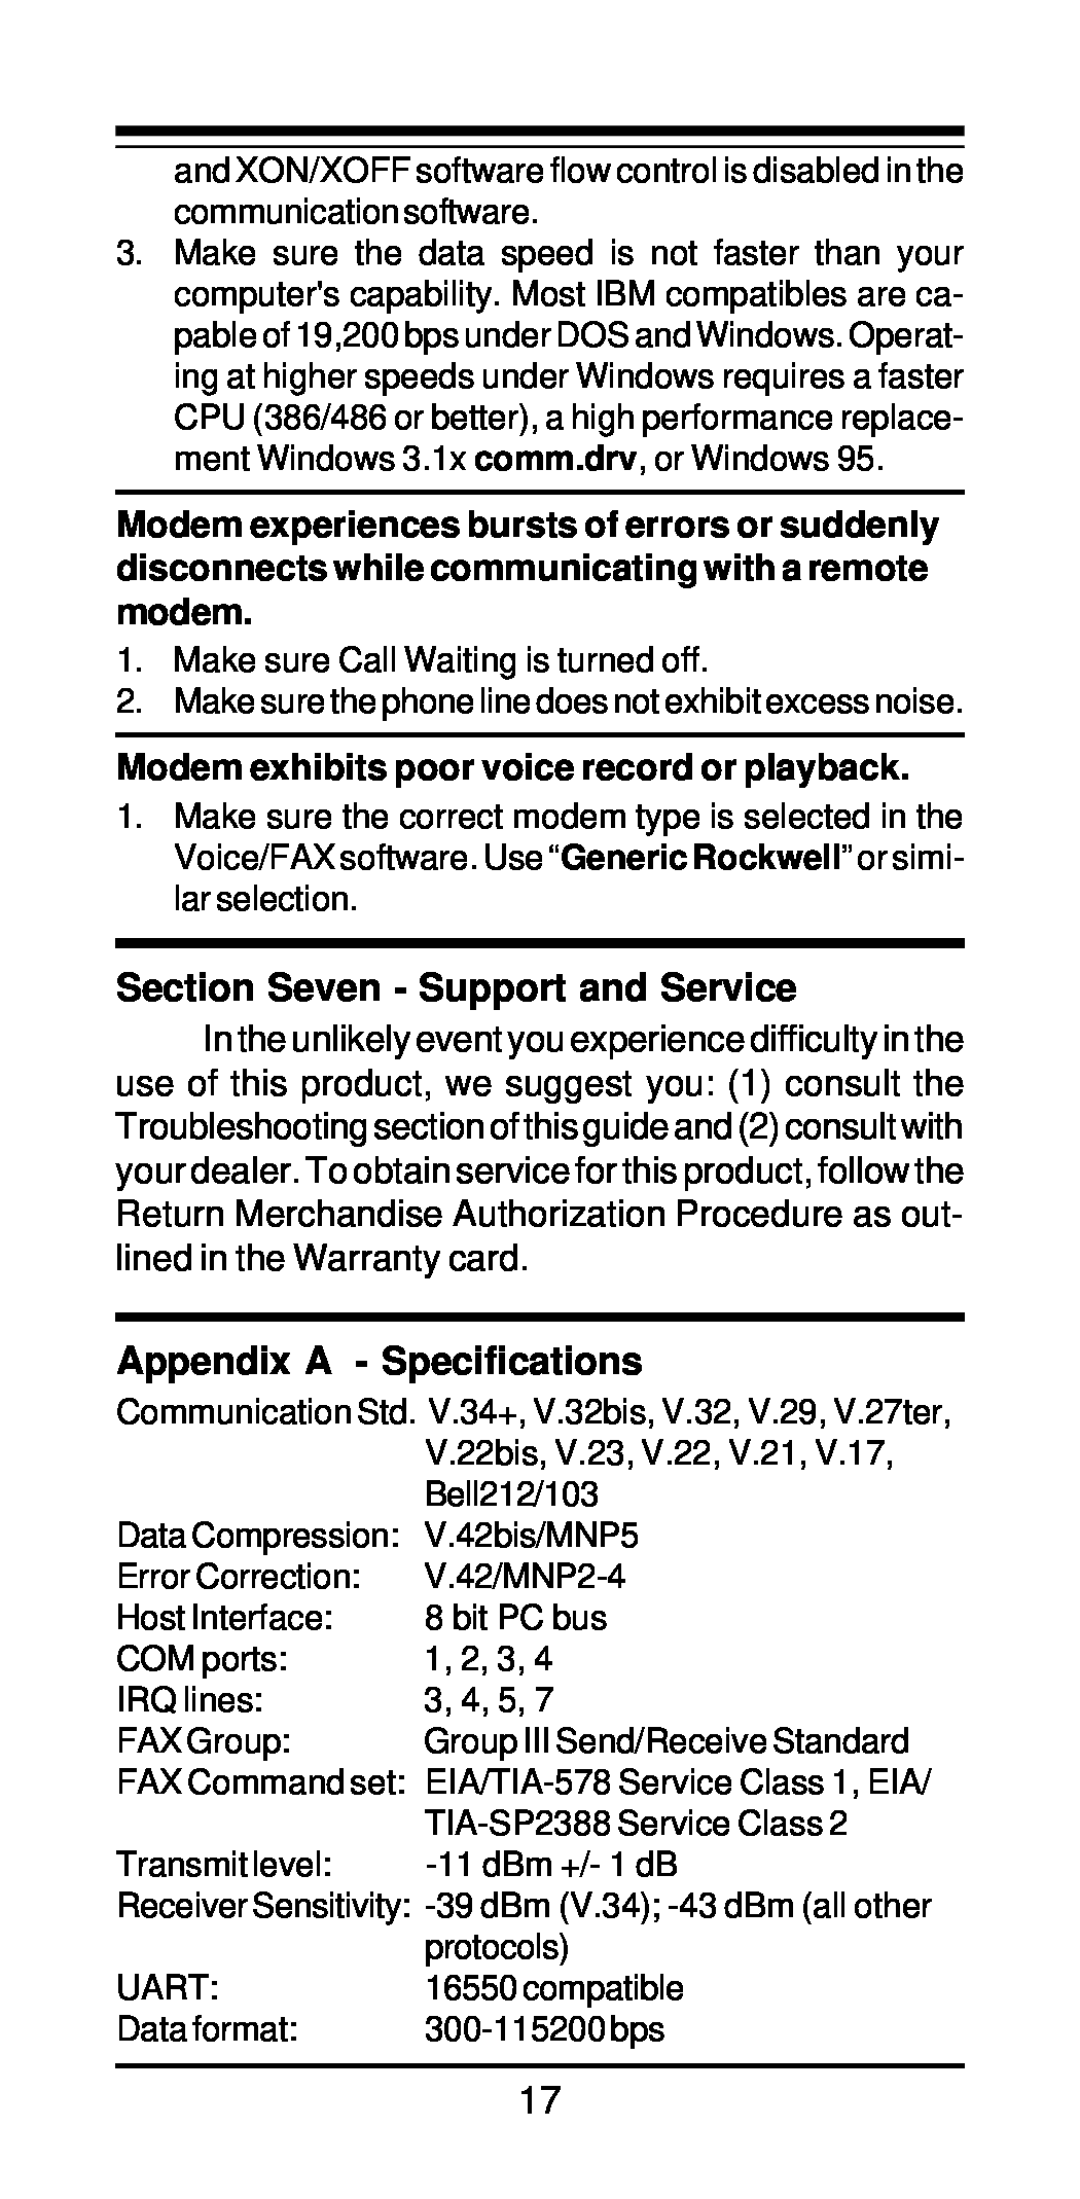 MaxTech xpvs336i user manual Section Seven - Support and Service, Appendix A - Specifications 